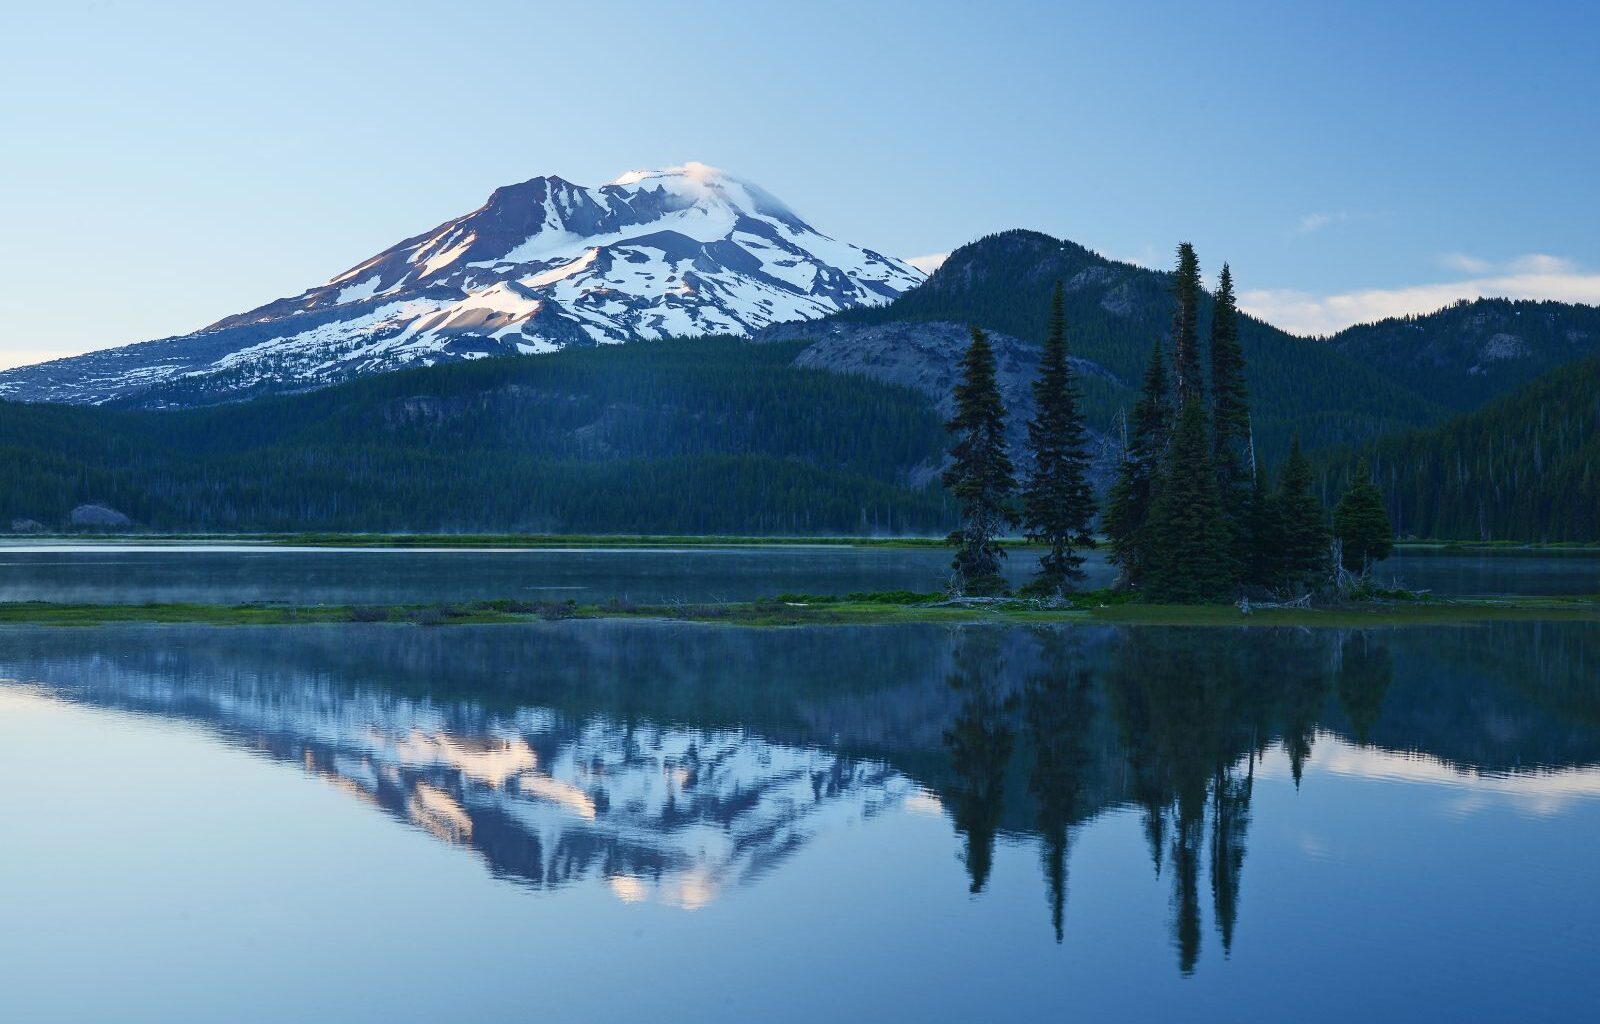 things to do in bend oregon